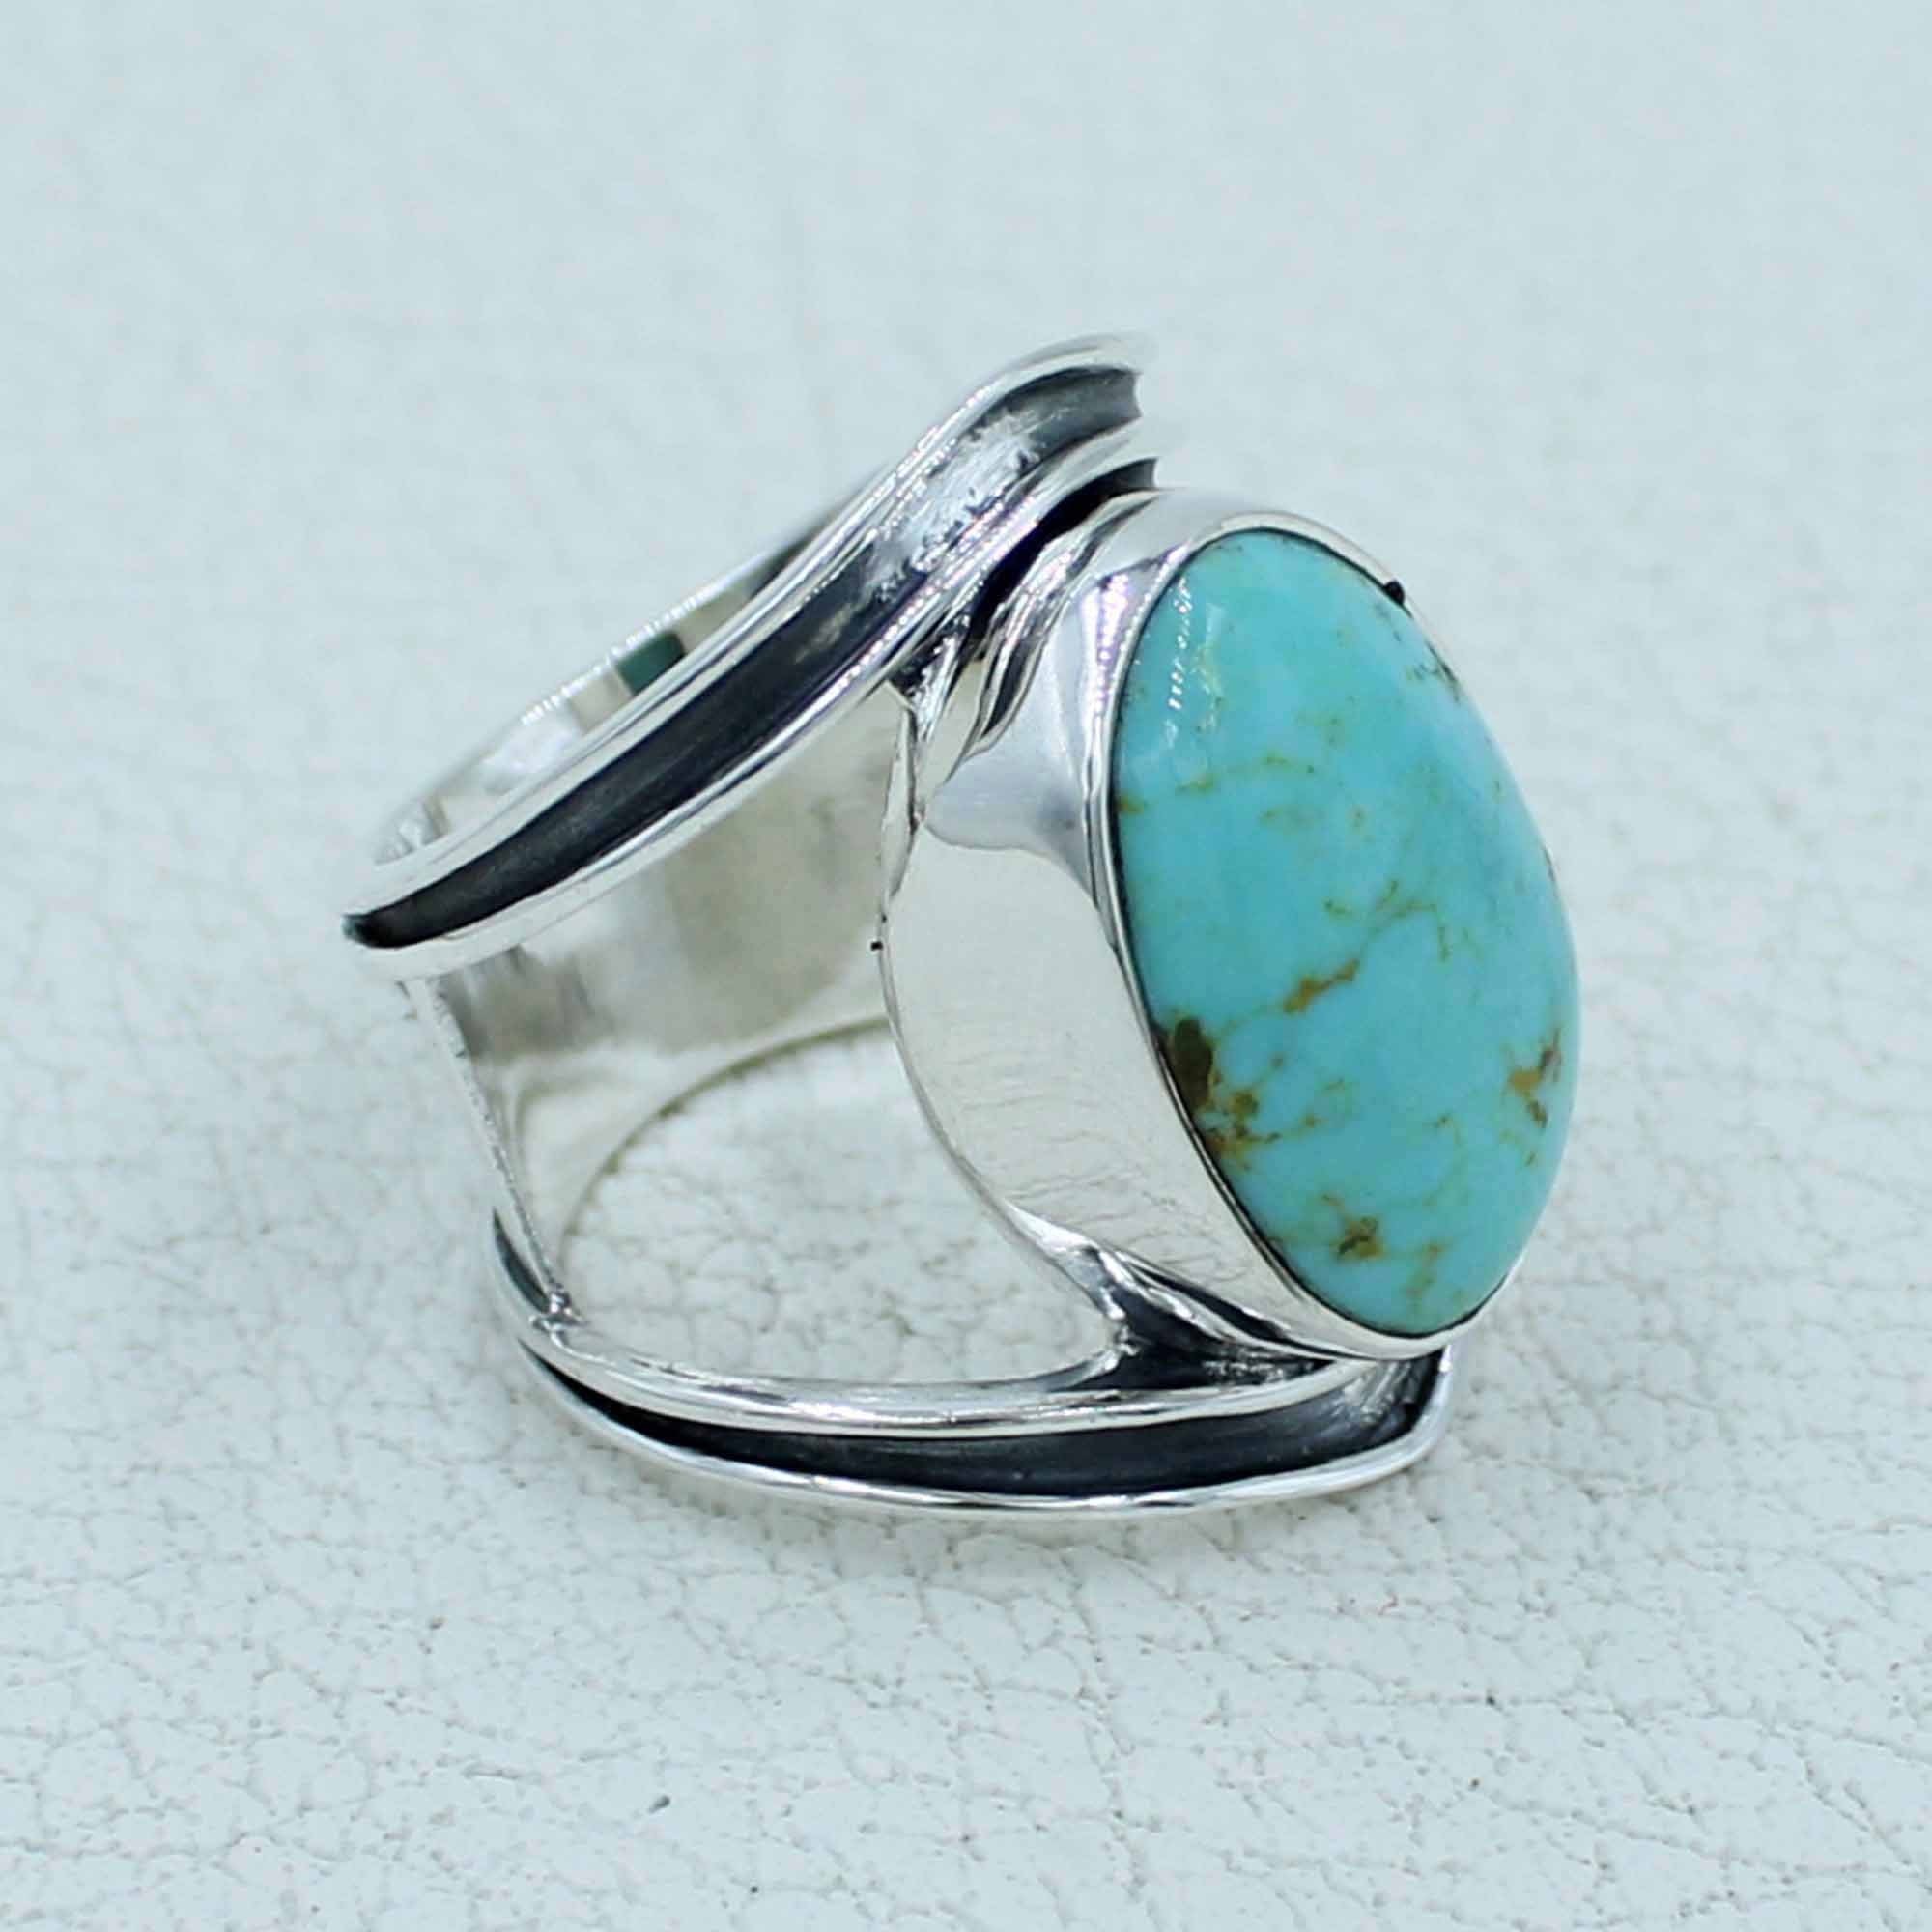 Mexican Turquoise Ring - Turquoise Jewelry